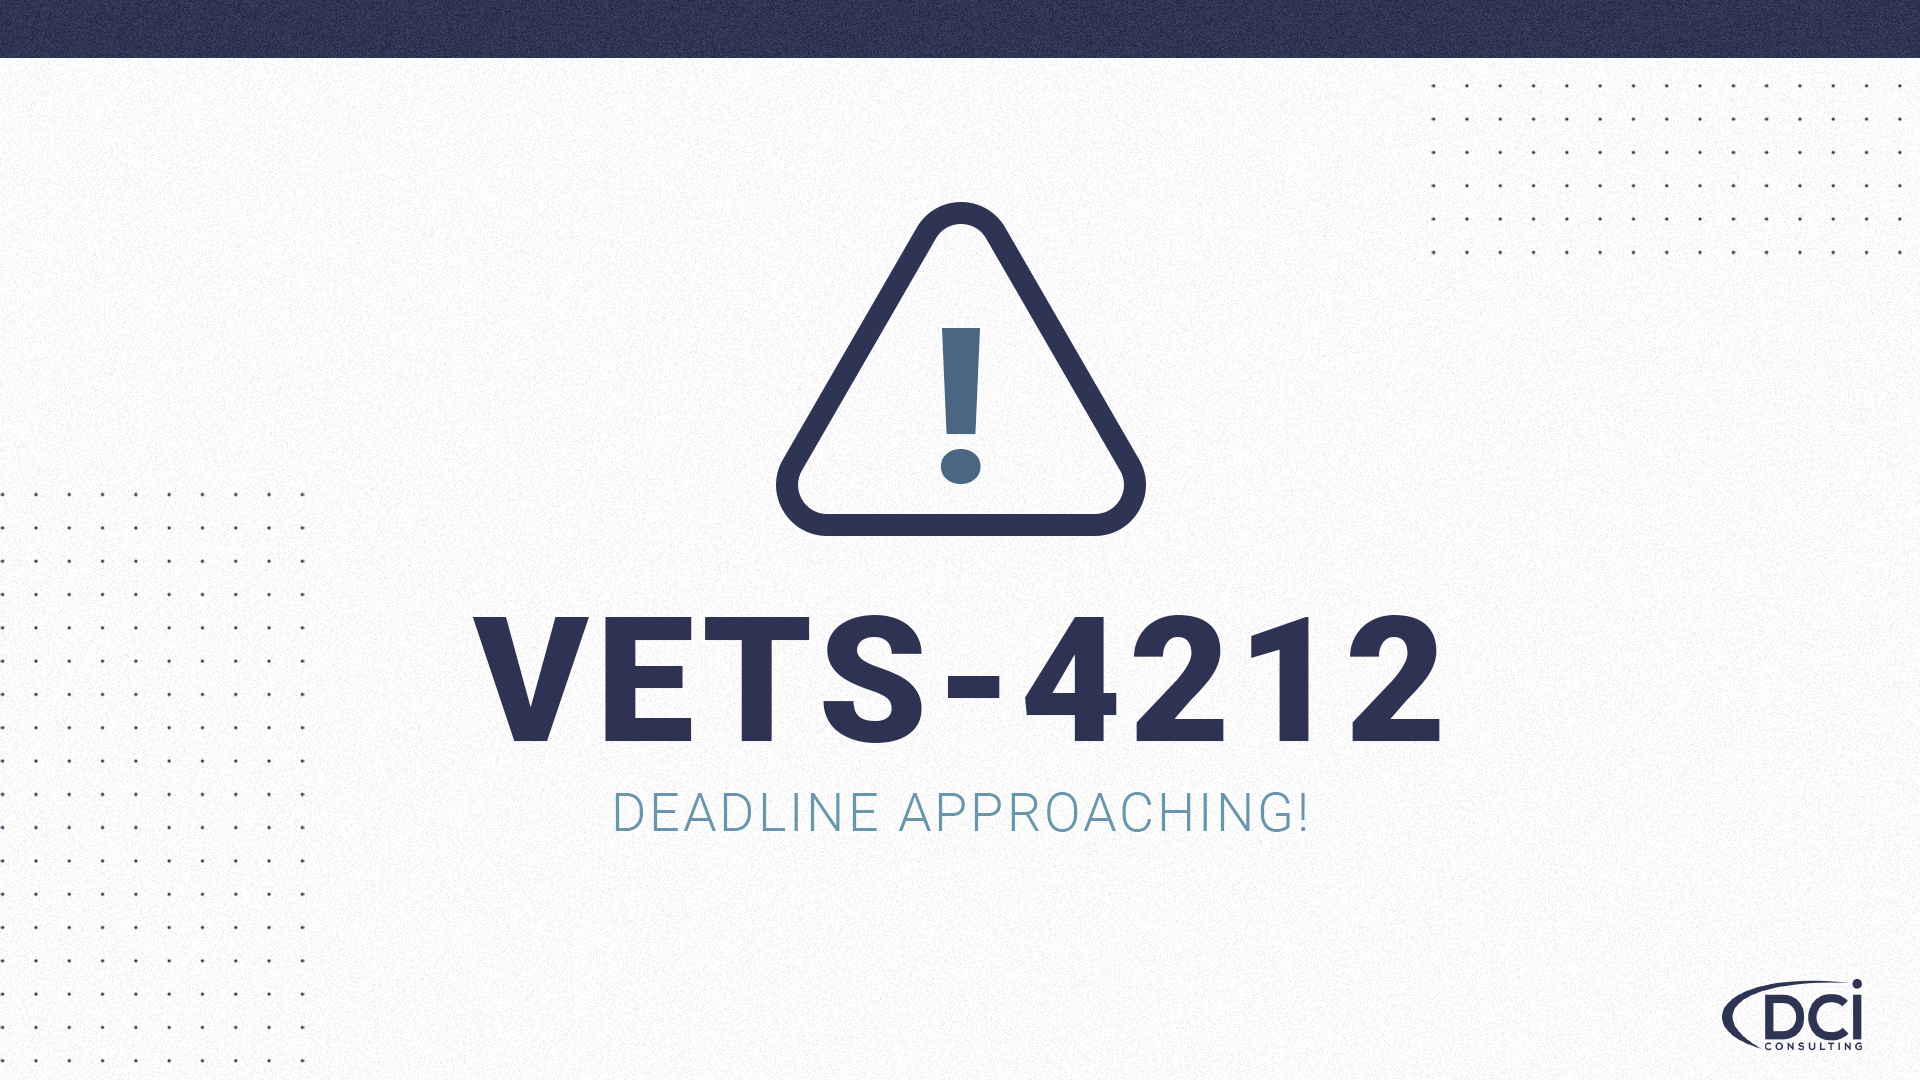 Tips and Reminders for VETS4212 Reporting